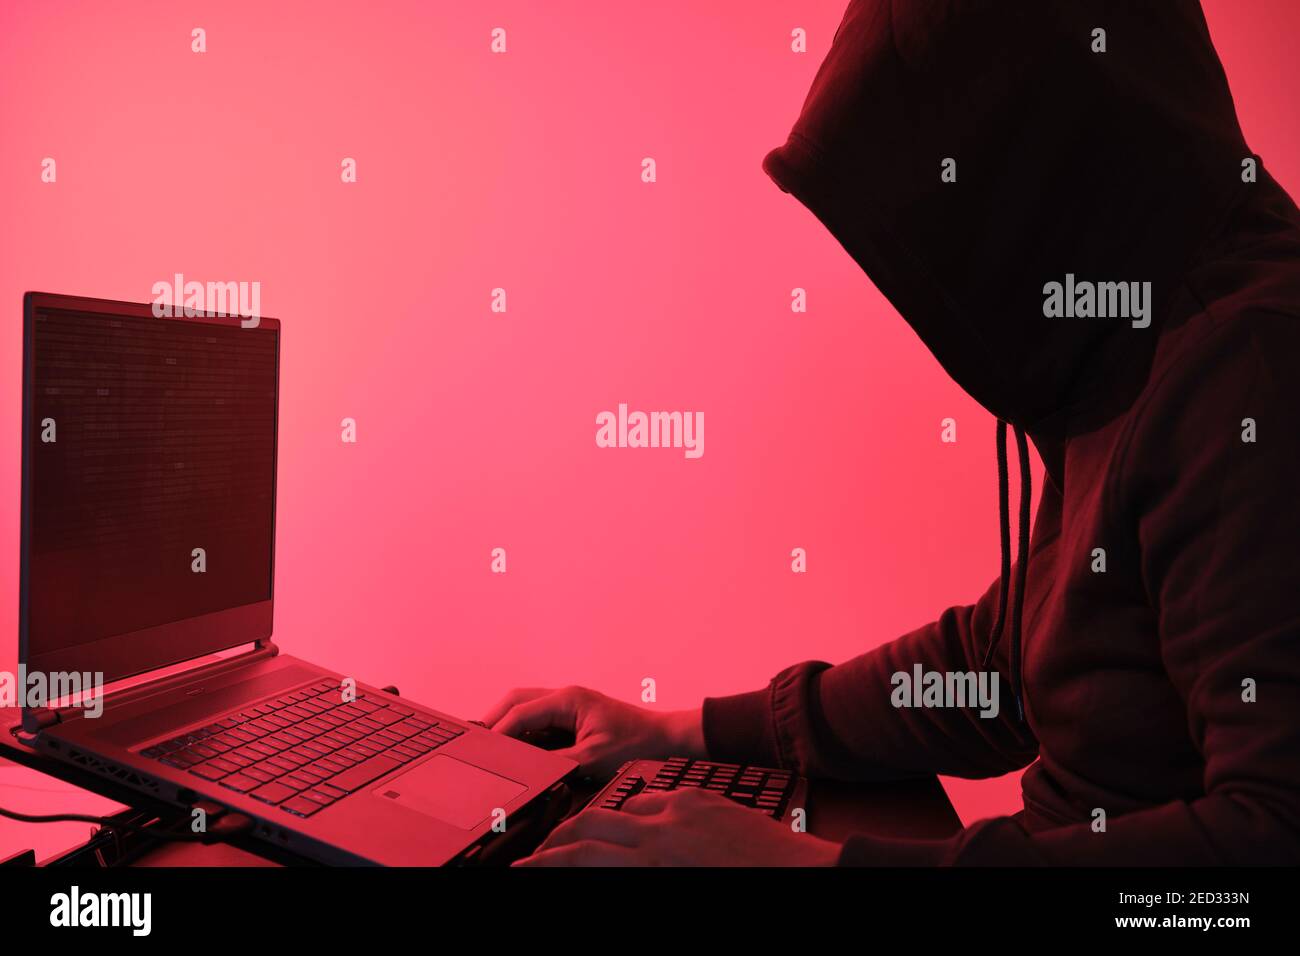 Hooded hacker in front of a computer for organizing massive data breach attack around the world. Cyber criminal concept. Stock Photo